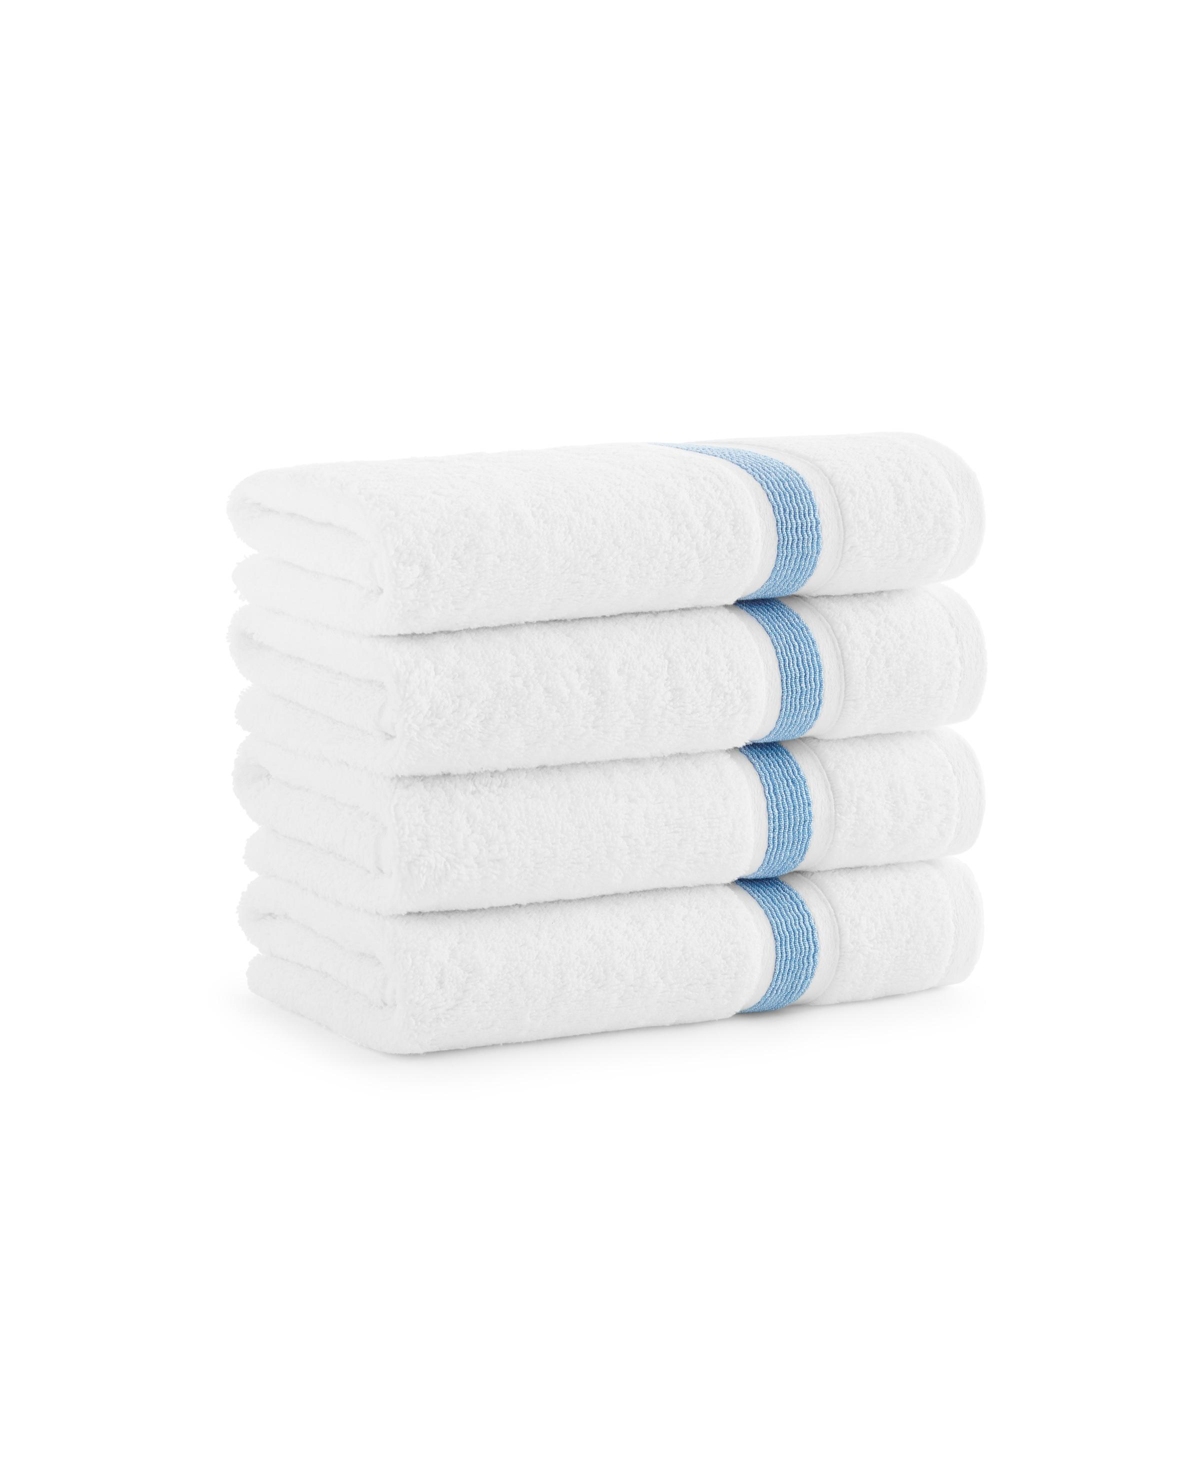 Aston And Arden Aegean Eco-friendly Recycled Turkish Hand Towels (4 Pack), 18x30, 600 Gsm, White With Weft Woven Str In Blue